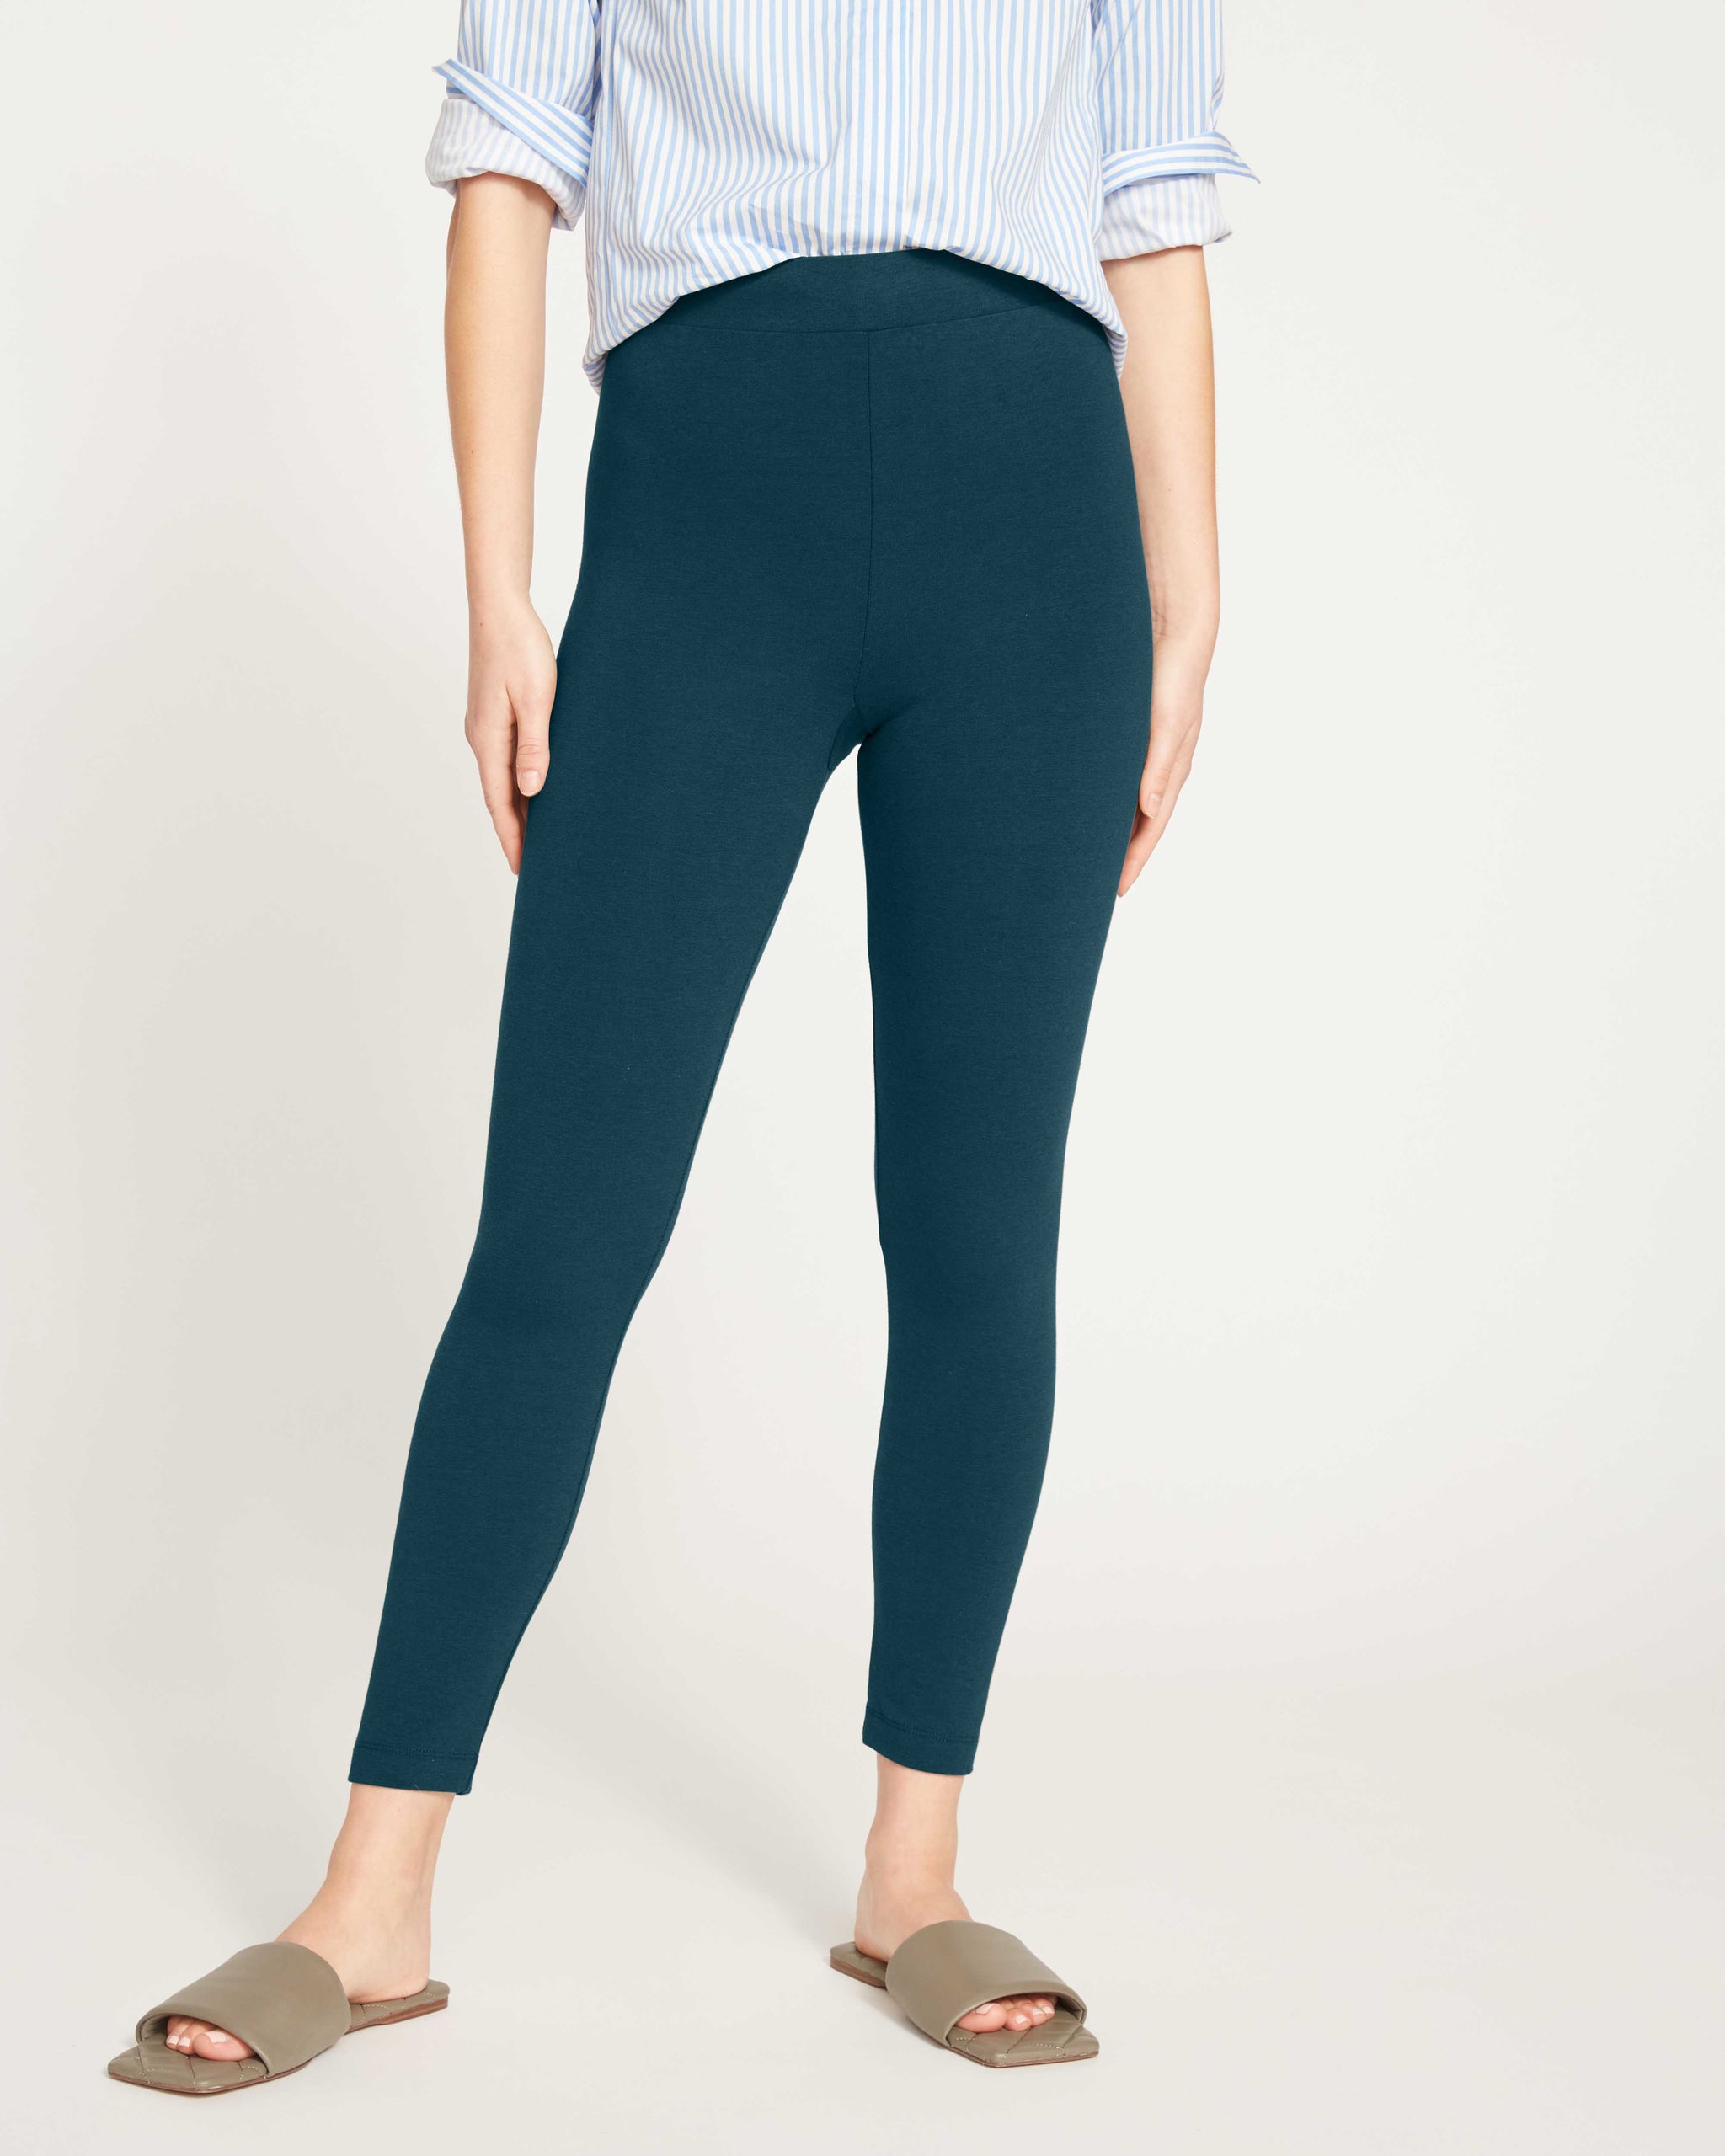 EVERLANE THE PERFORM ANKLE LEGGINGS IN GREEN DOT SIZE LARGE NEW